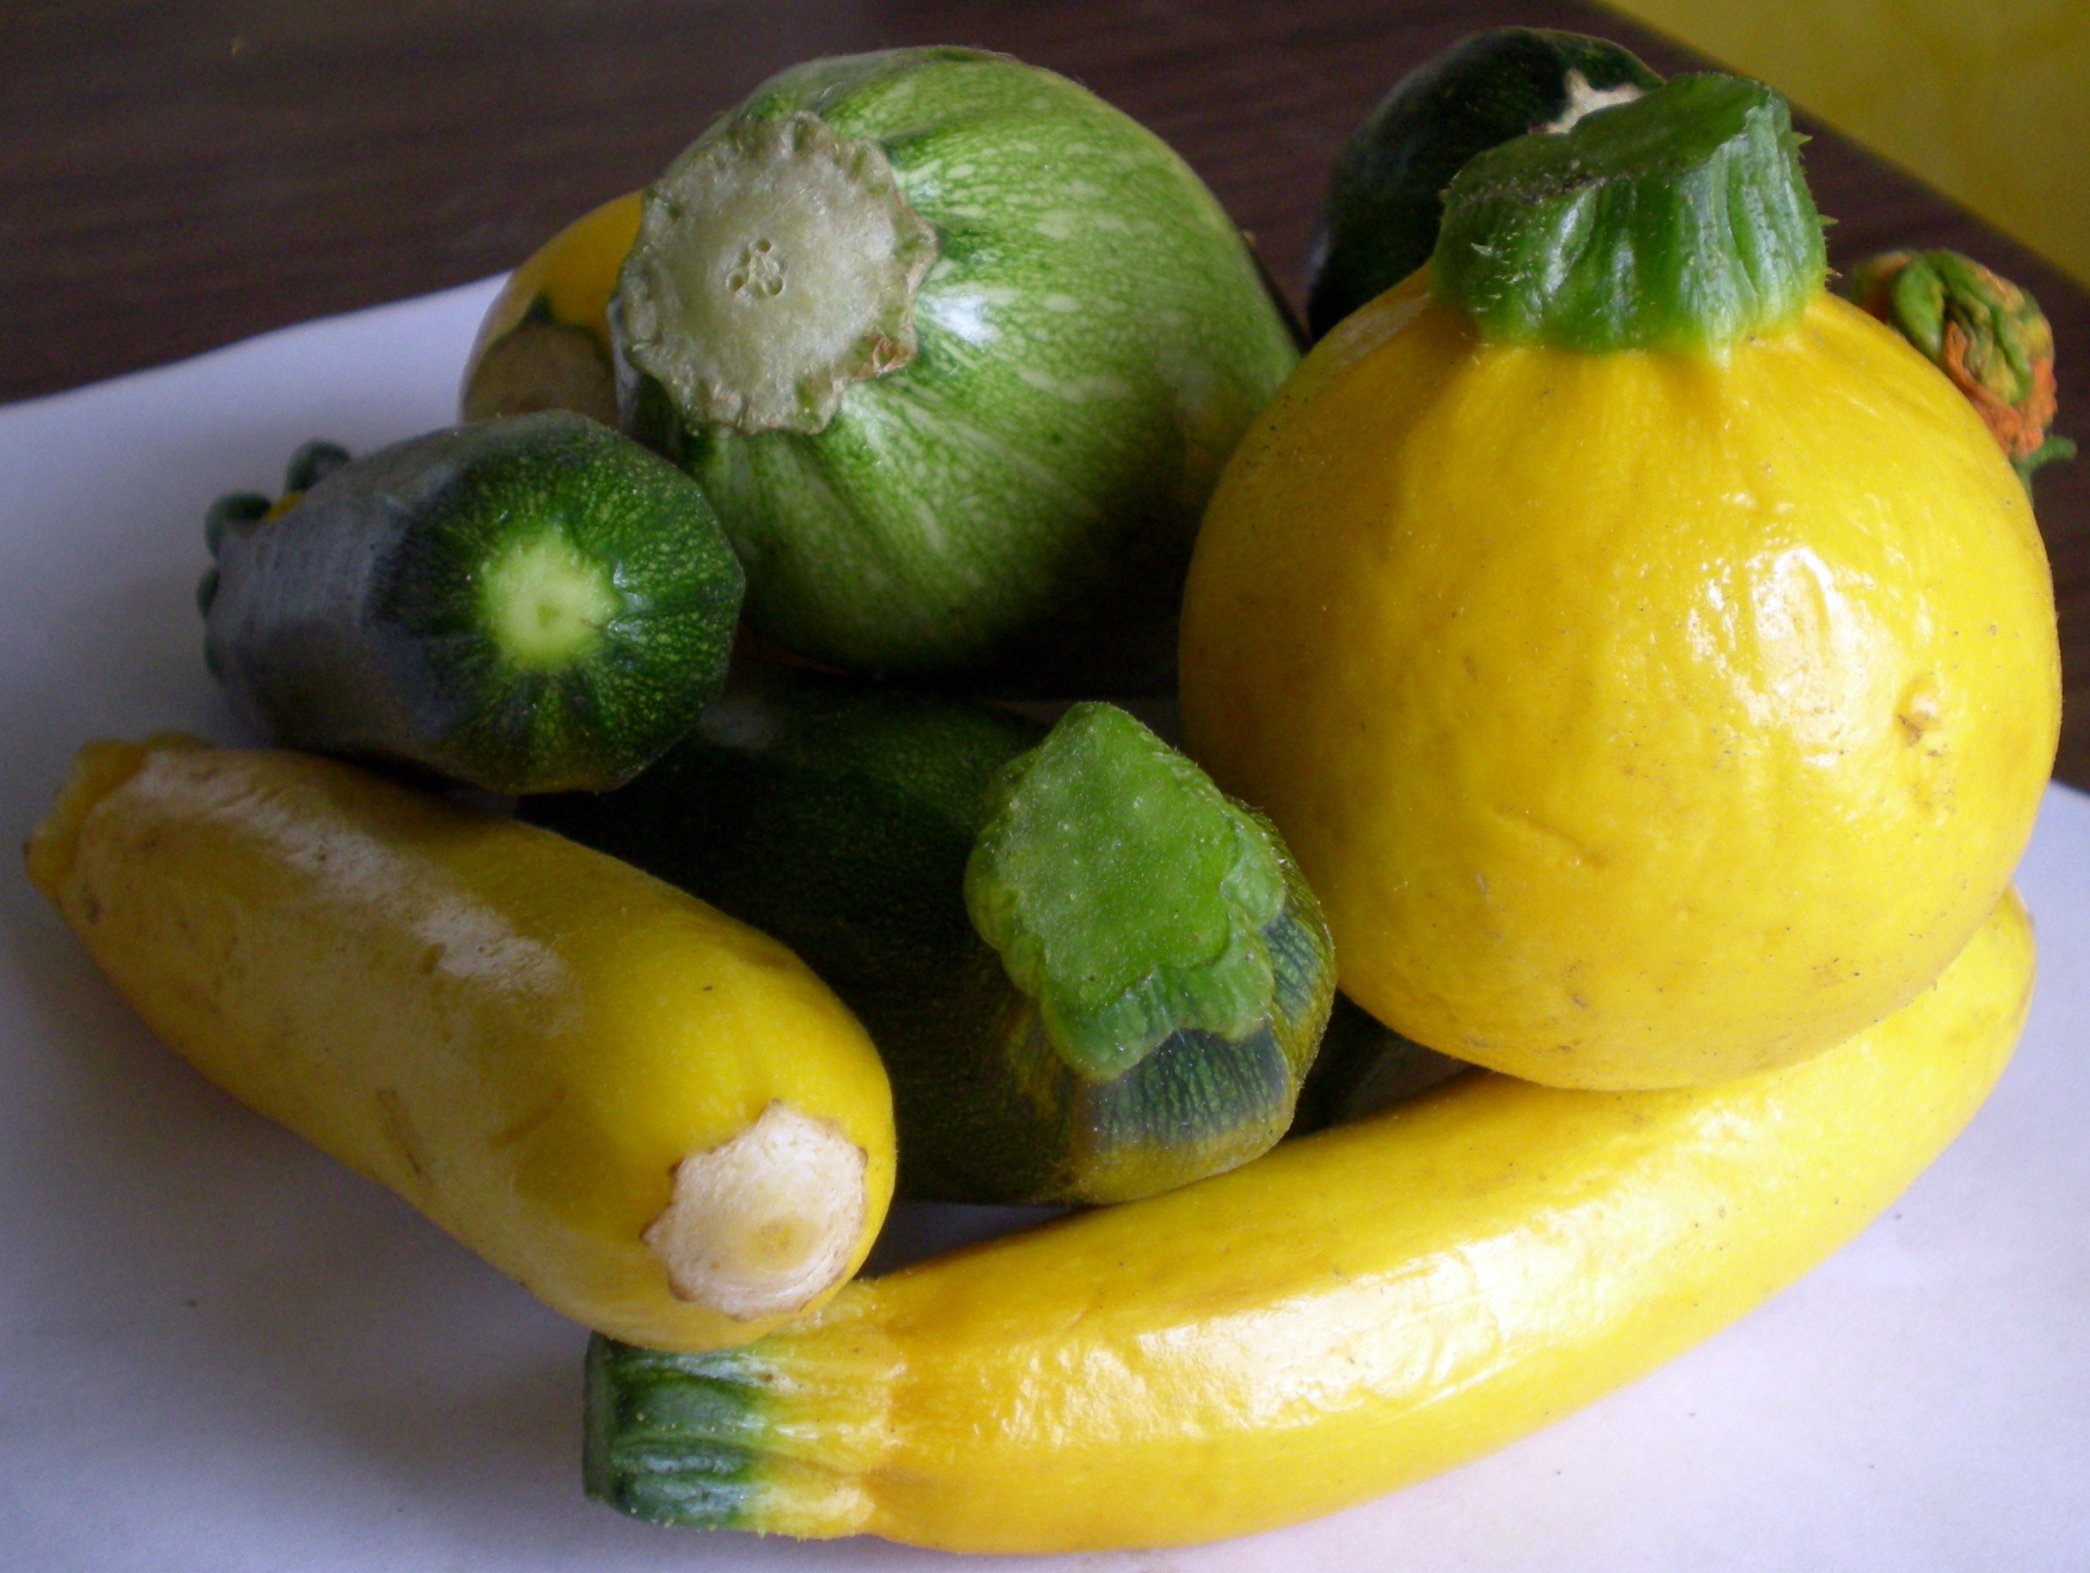 a yellow cucumber and some other fruit are together